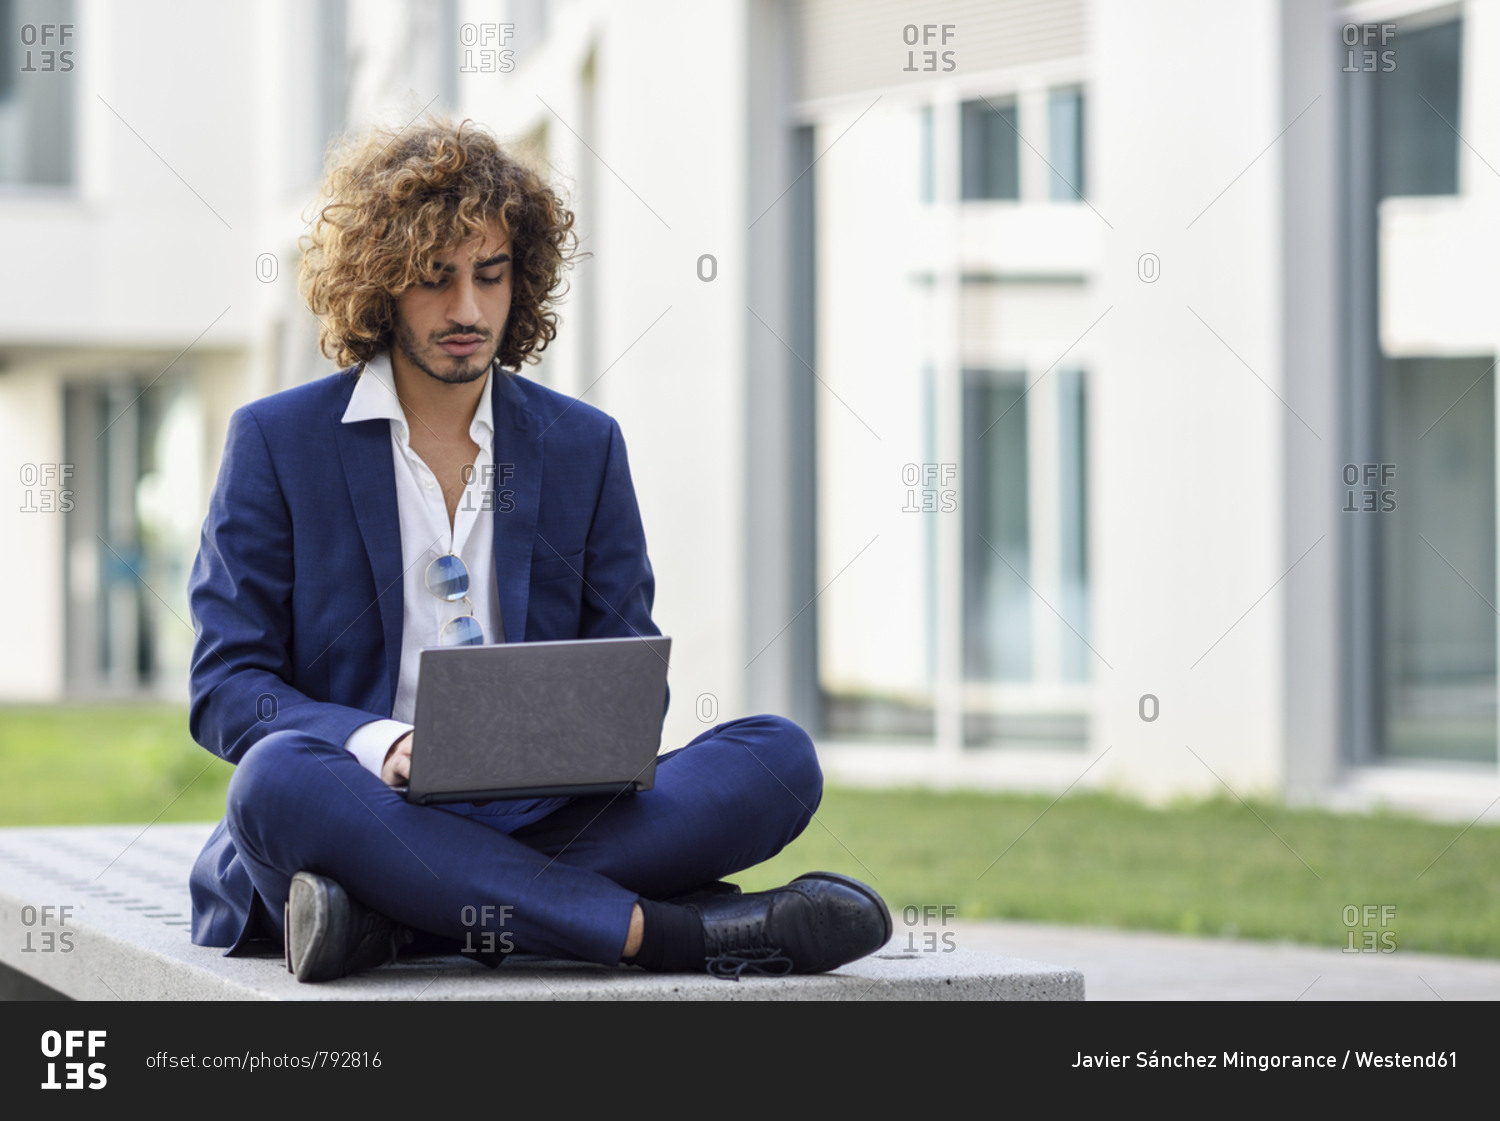 Portrait of young businessman with curly hair wearing blue suit sitting on bench outdoors using laptop